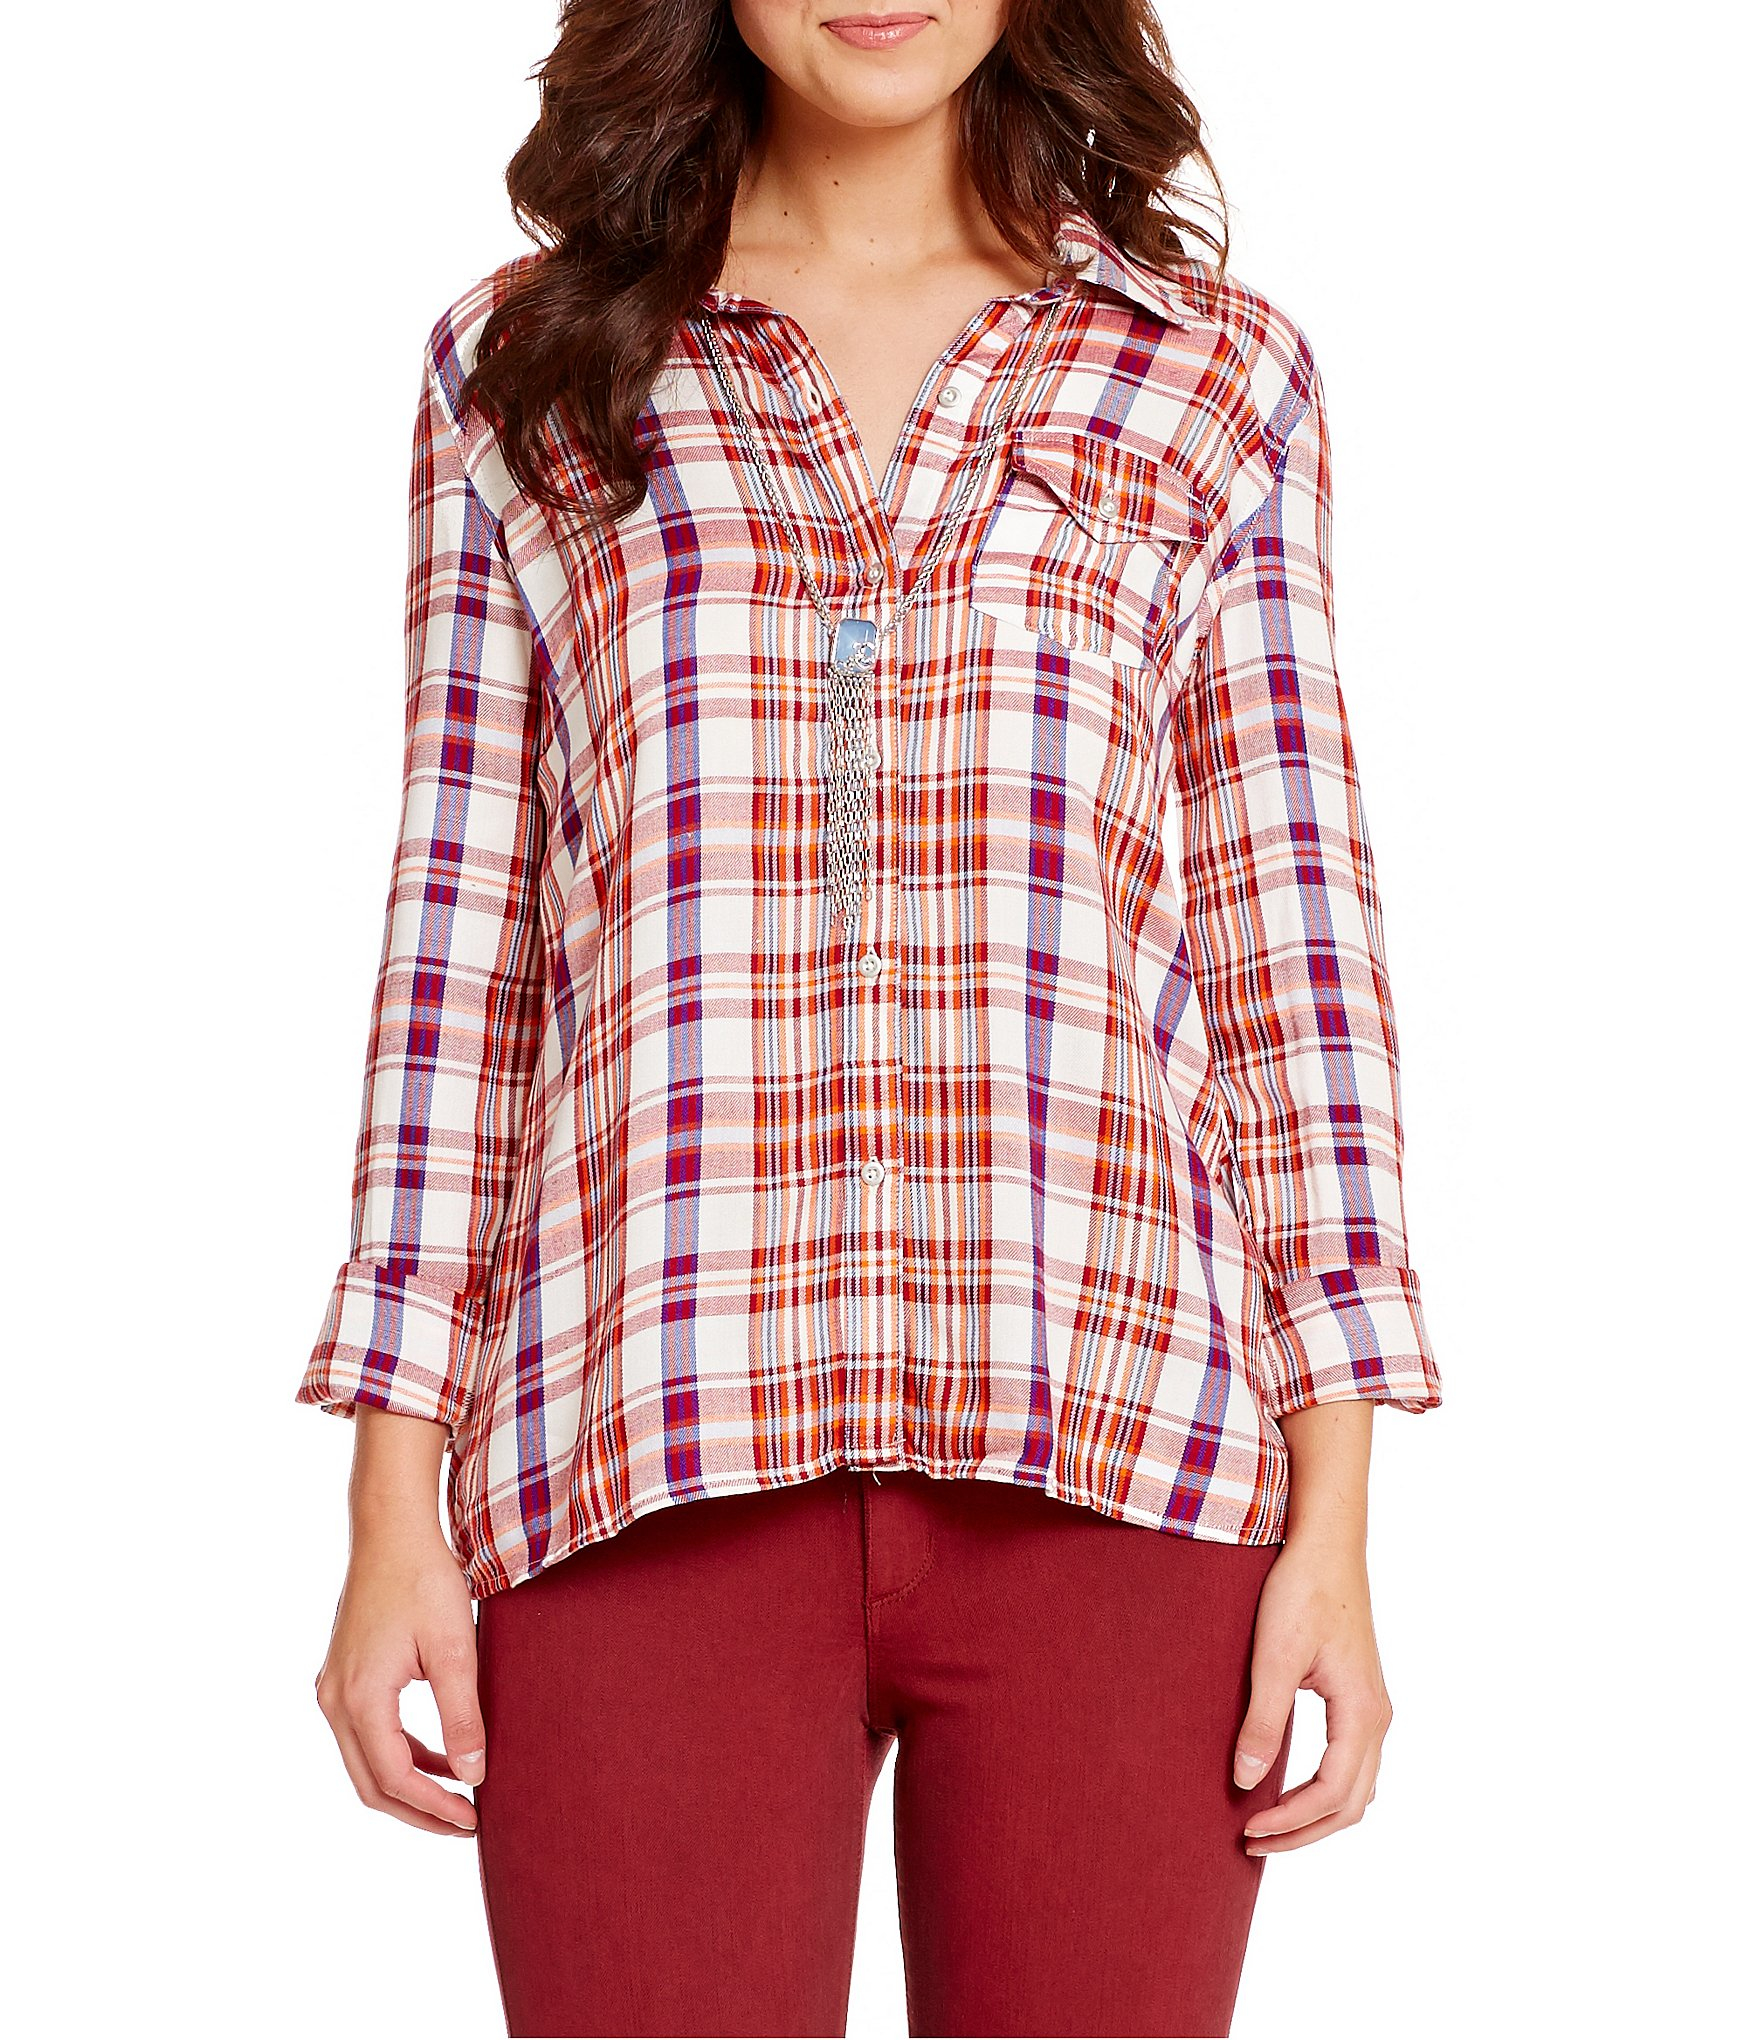 Jessica simpson Nomad Button-front Plaid Shirt in Red | Lyst